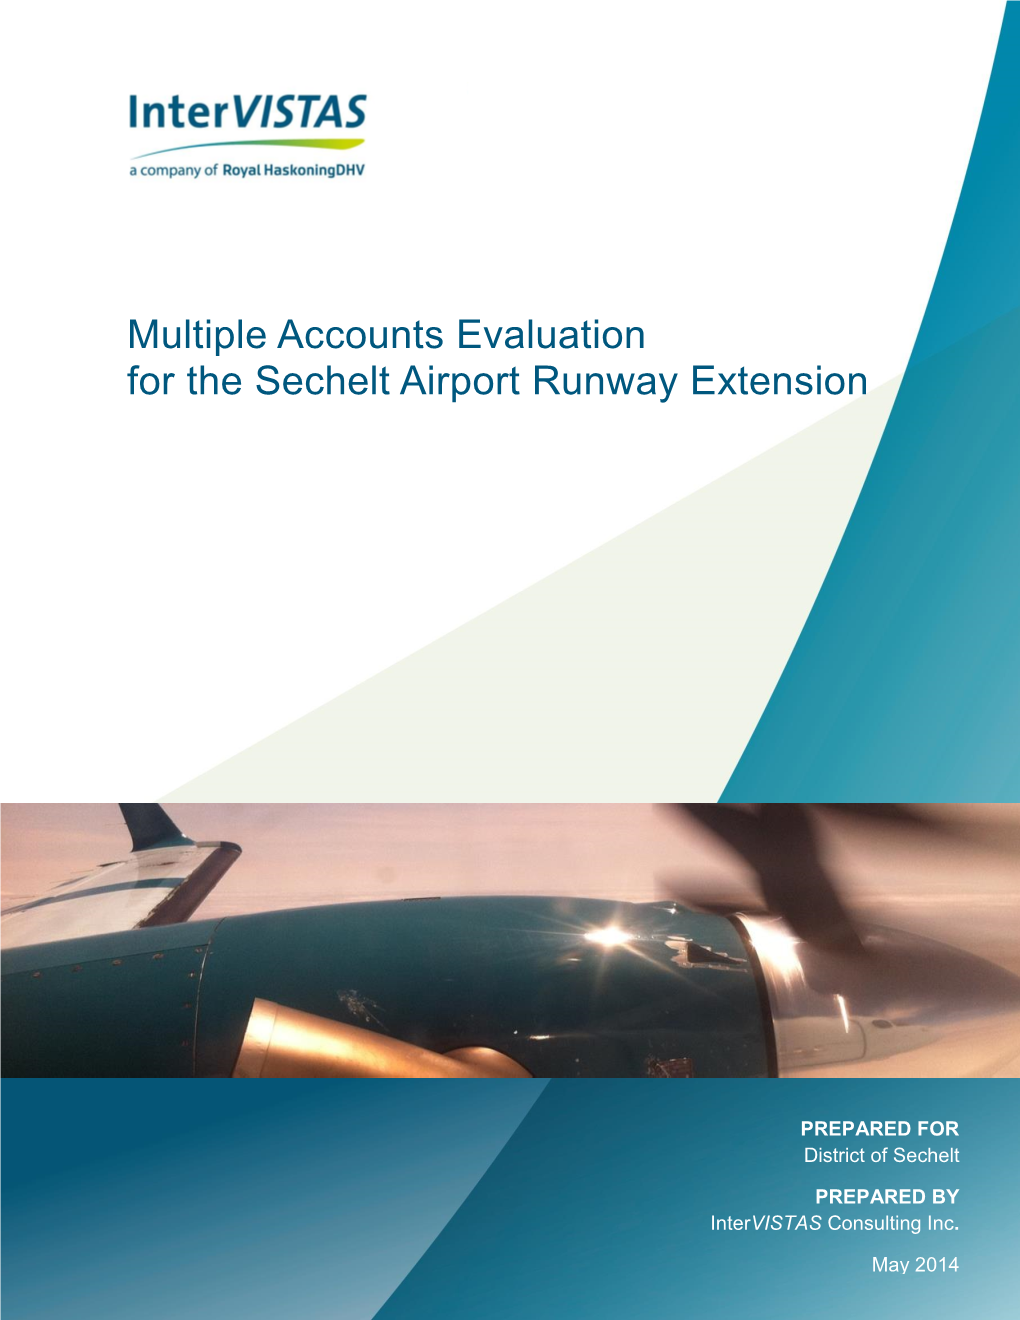 Multiple Accounts Evaluation for the Sechelt Airport Runway Extension